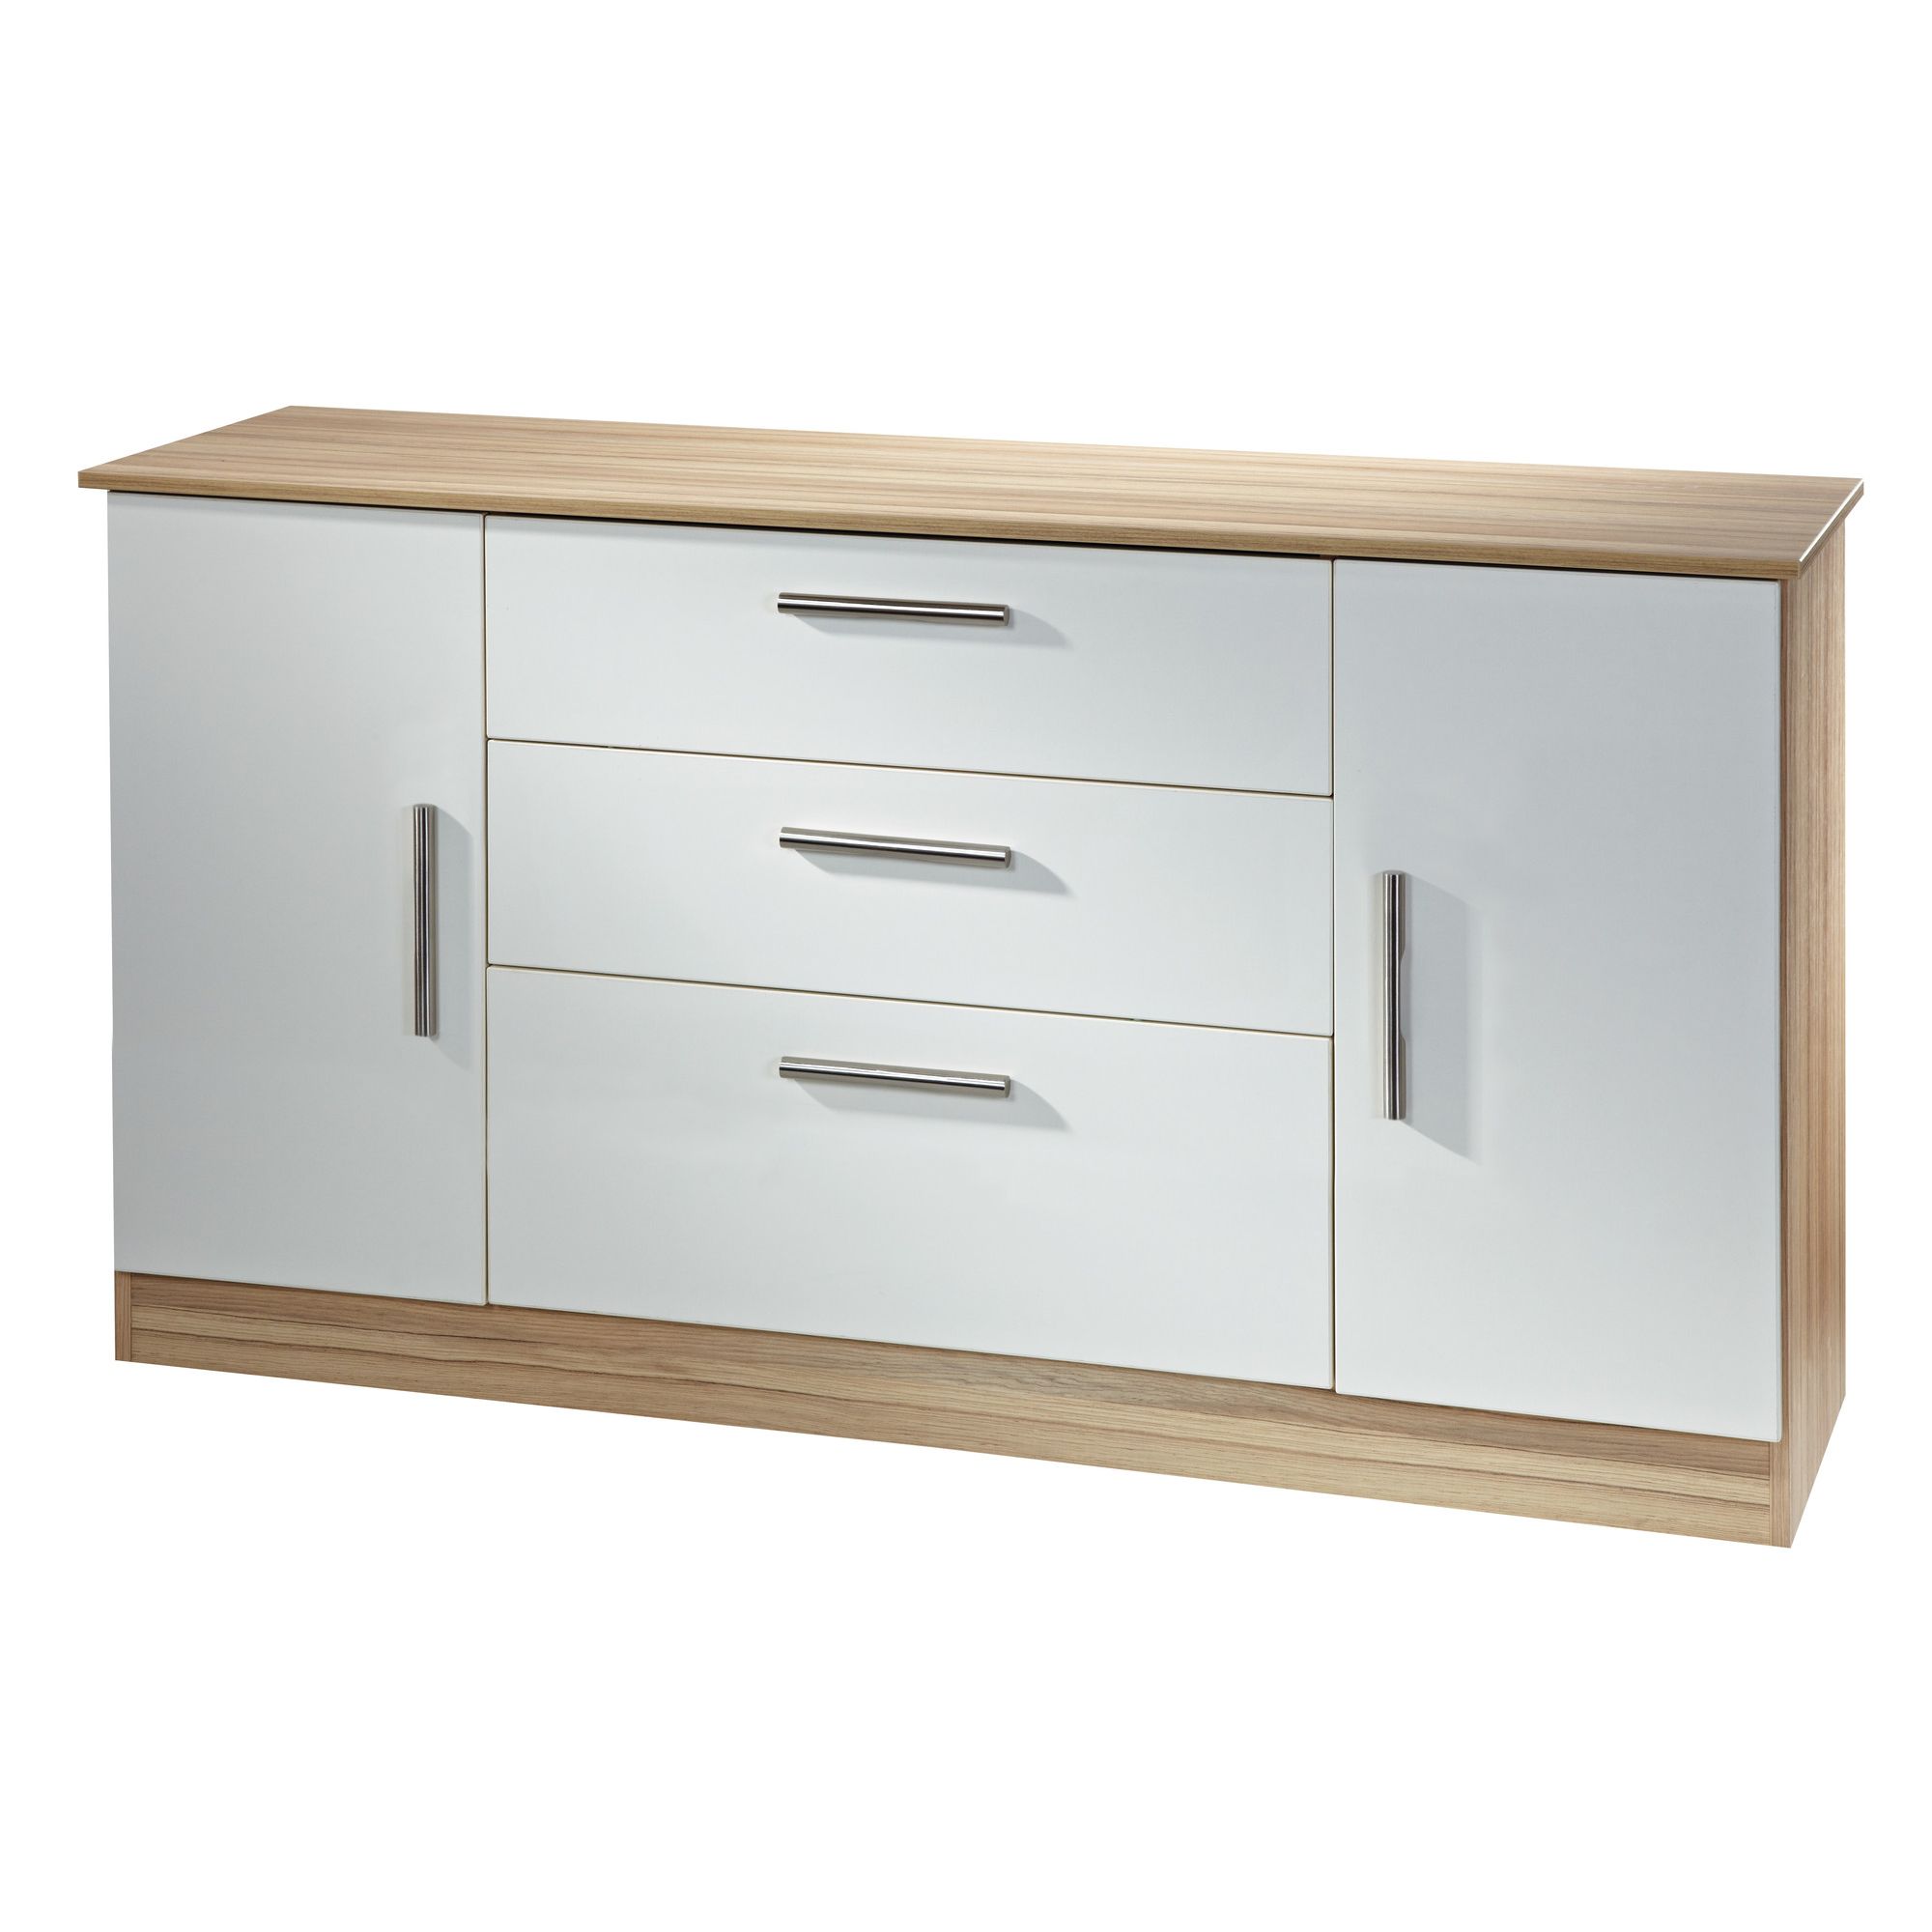 Welcome Furniture Living Room Wide 2 Door / 3 Drawer Unit - Panga at Tesco Direct